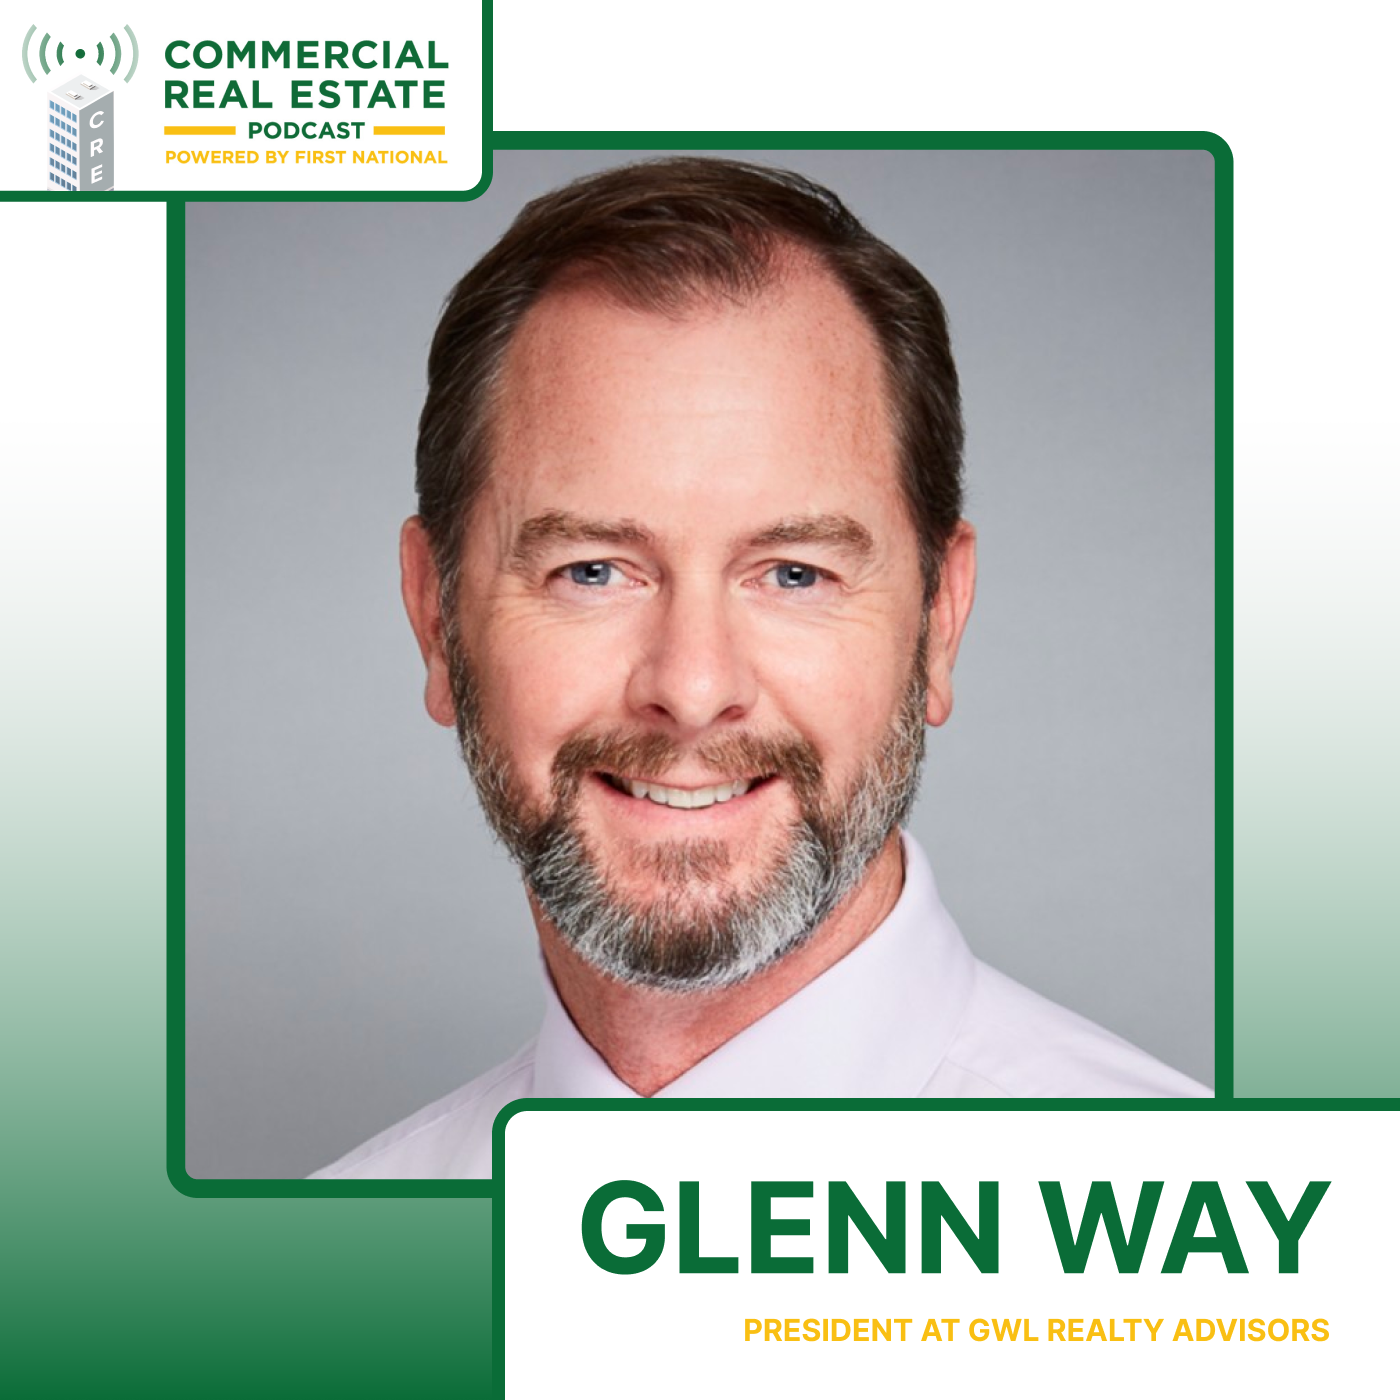 Seizing Growth Opportunities in Commercial Real Estate with Glenn Way of GWL Realty Advisors